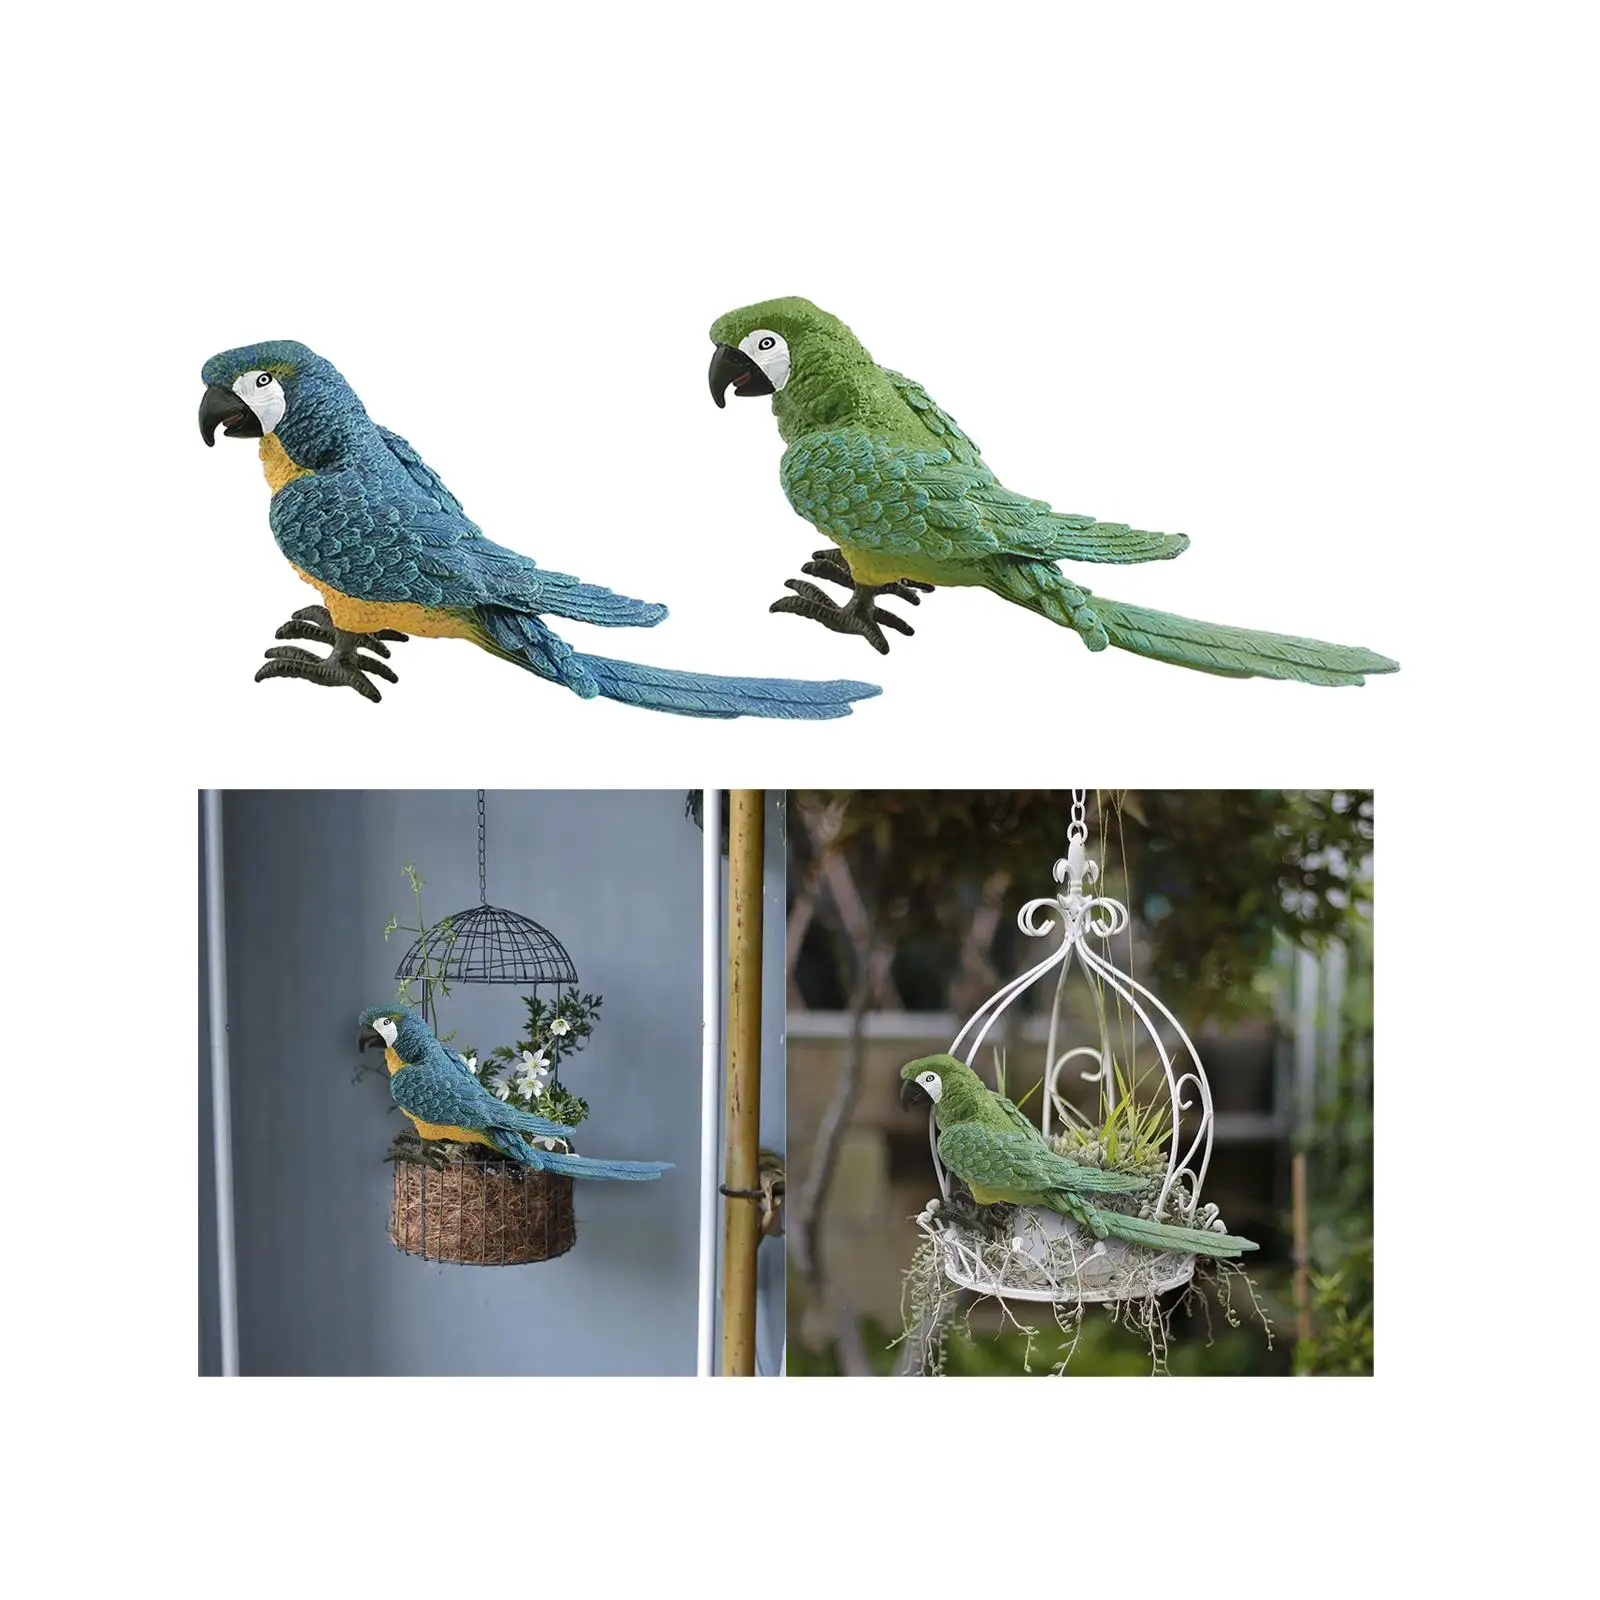 Artificial Parrot Statue Crafts Bird Ornaments Simulation Parrot Ornament for Indoor Outdoor Lawn Balcony Home Housewarming Gift